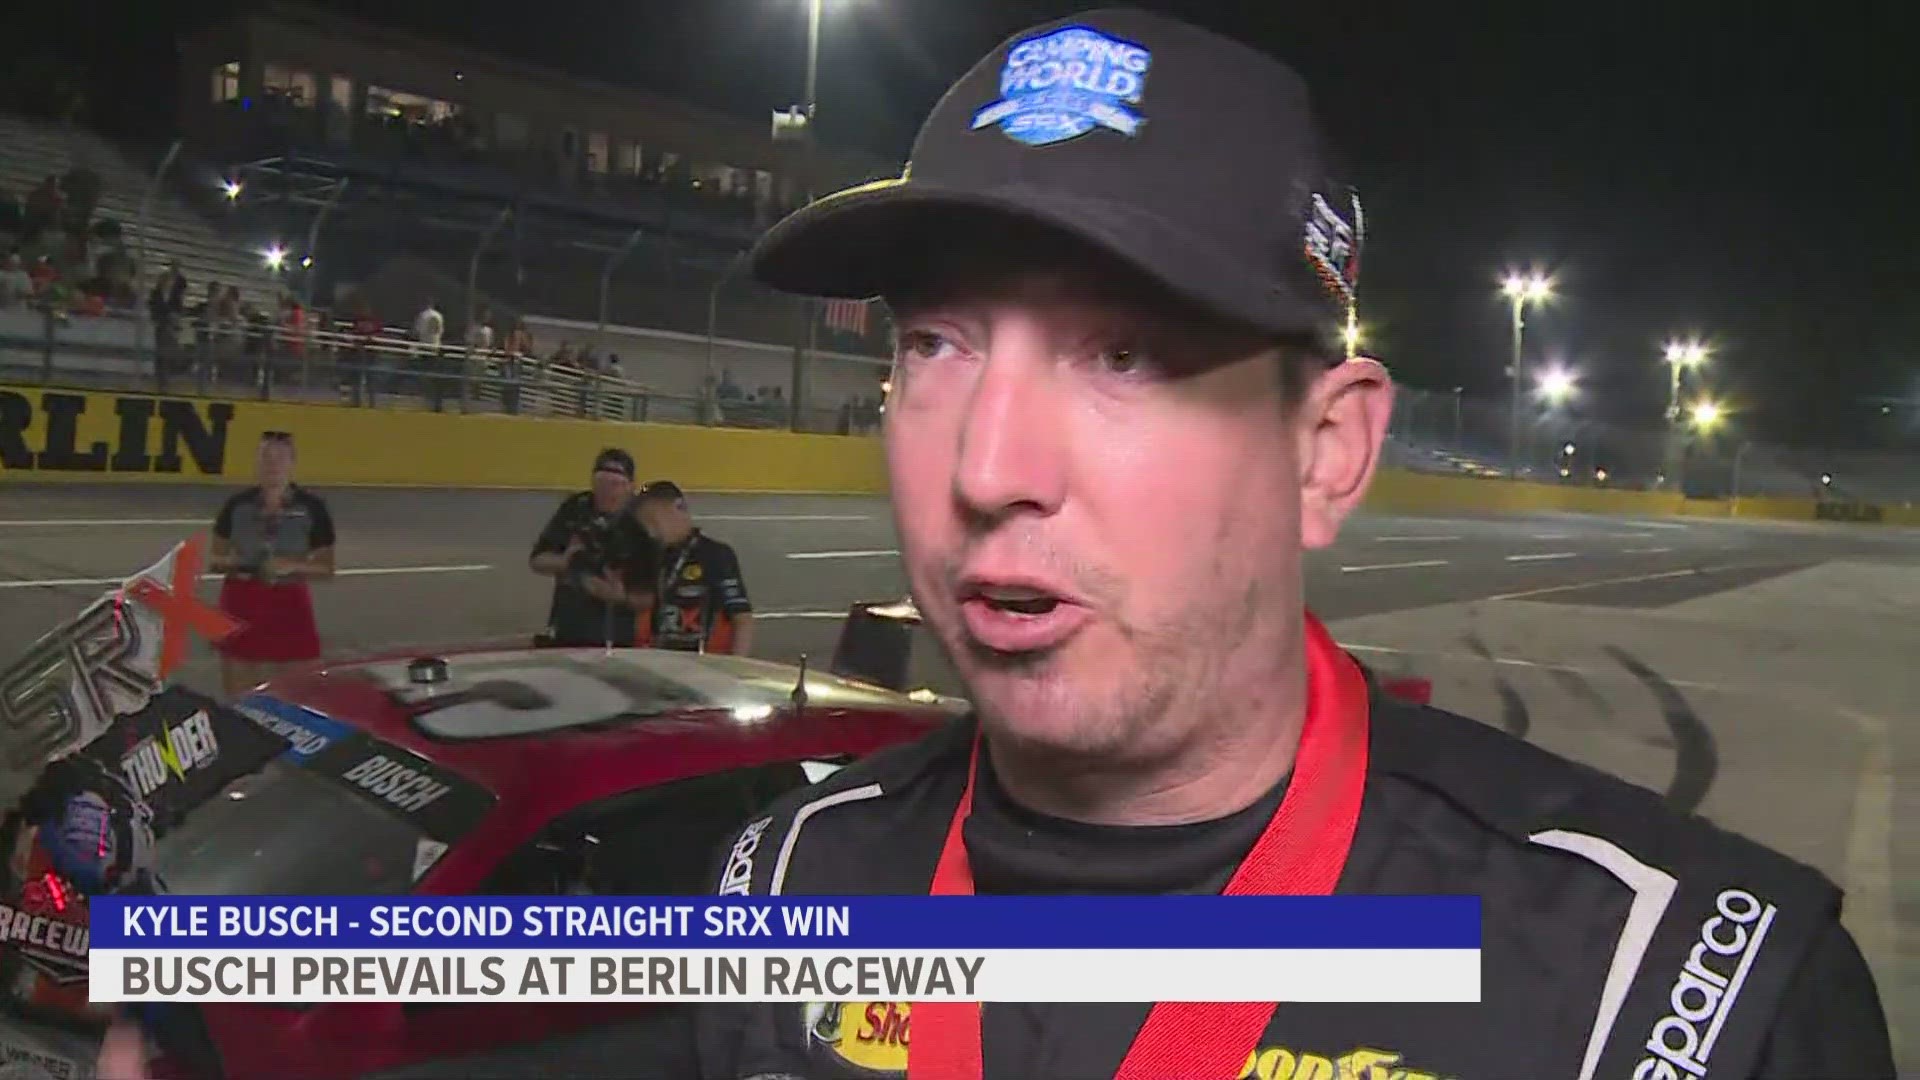 The win marks Kyle Busch's first victory at Berlin Raceway.